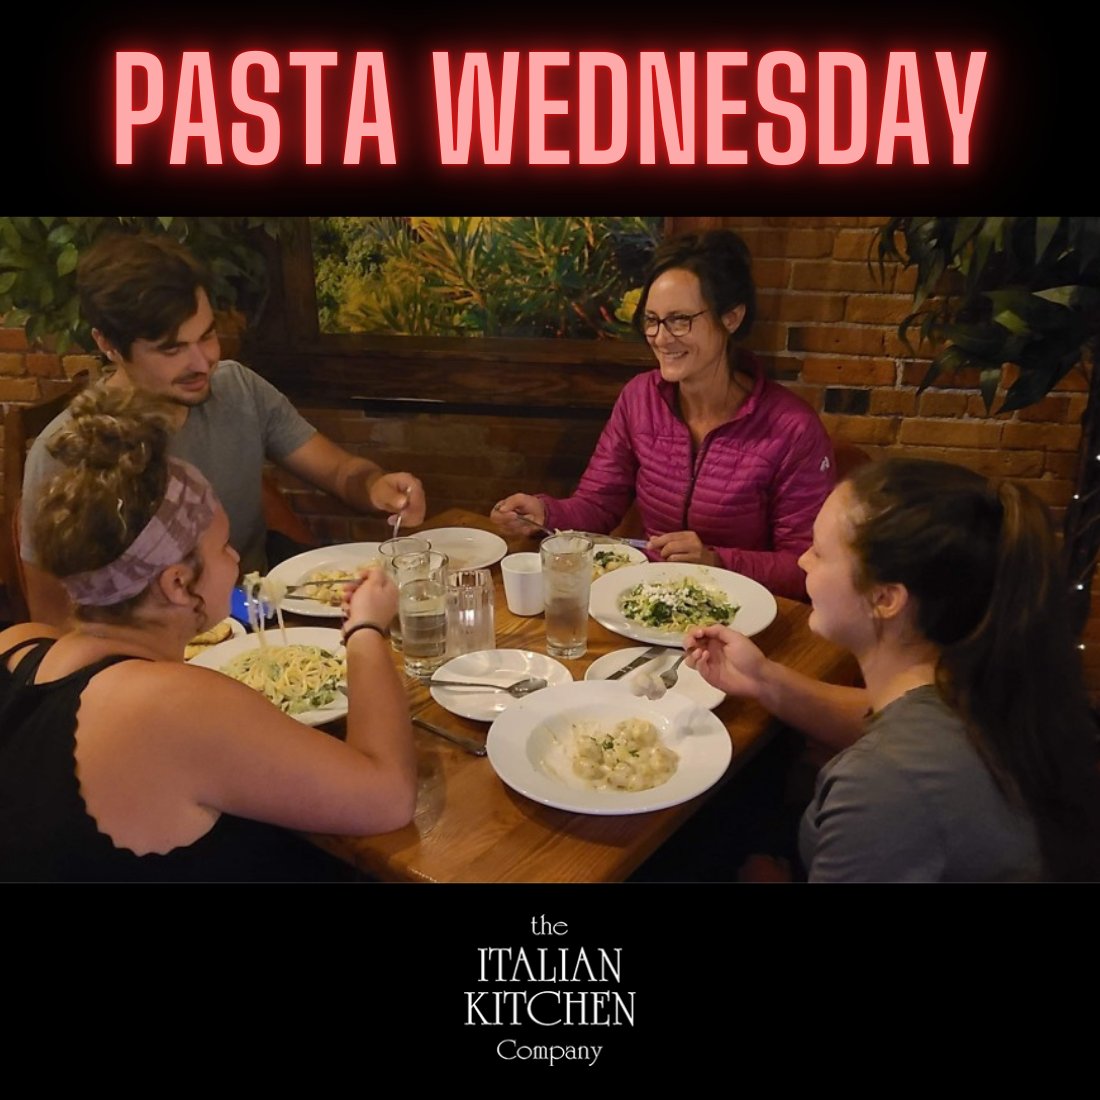 The best way to spend a Wednesday night is with us on PASTA WEDNESDAY!! All pastas are 20% off!!

#italiankitchenvernon #italiancooking #downtownvernon #vernonbc #vernoneats #goodeats #familynight #pastawednesday